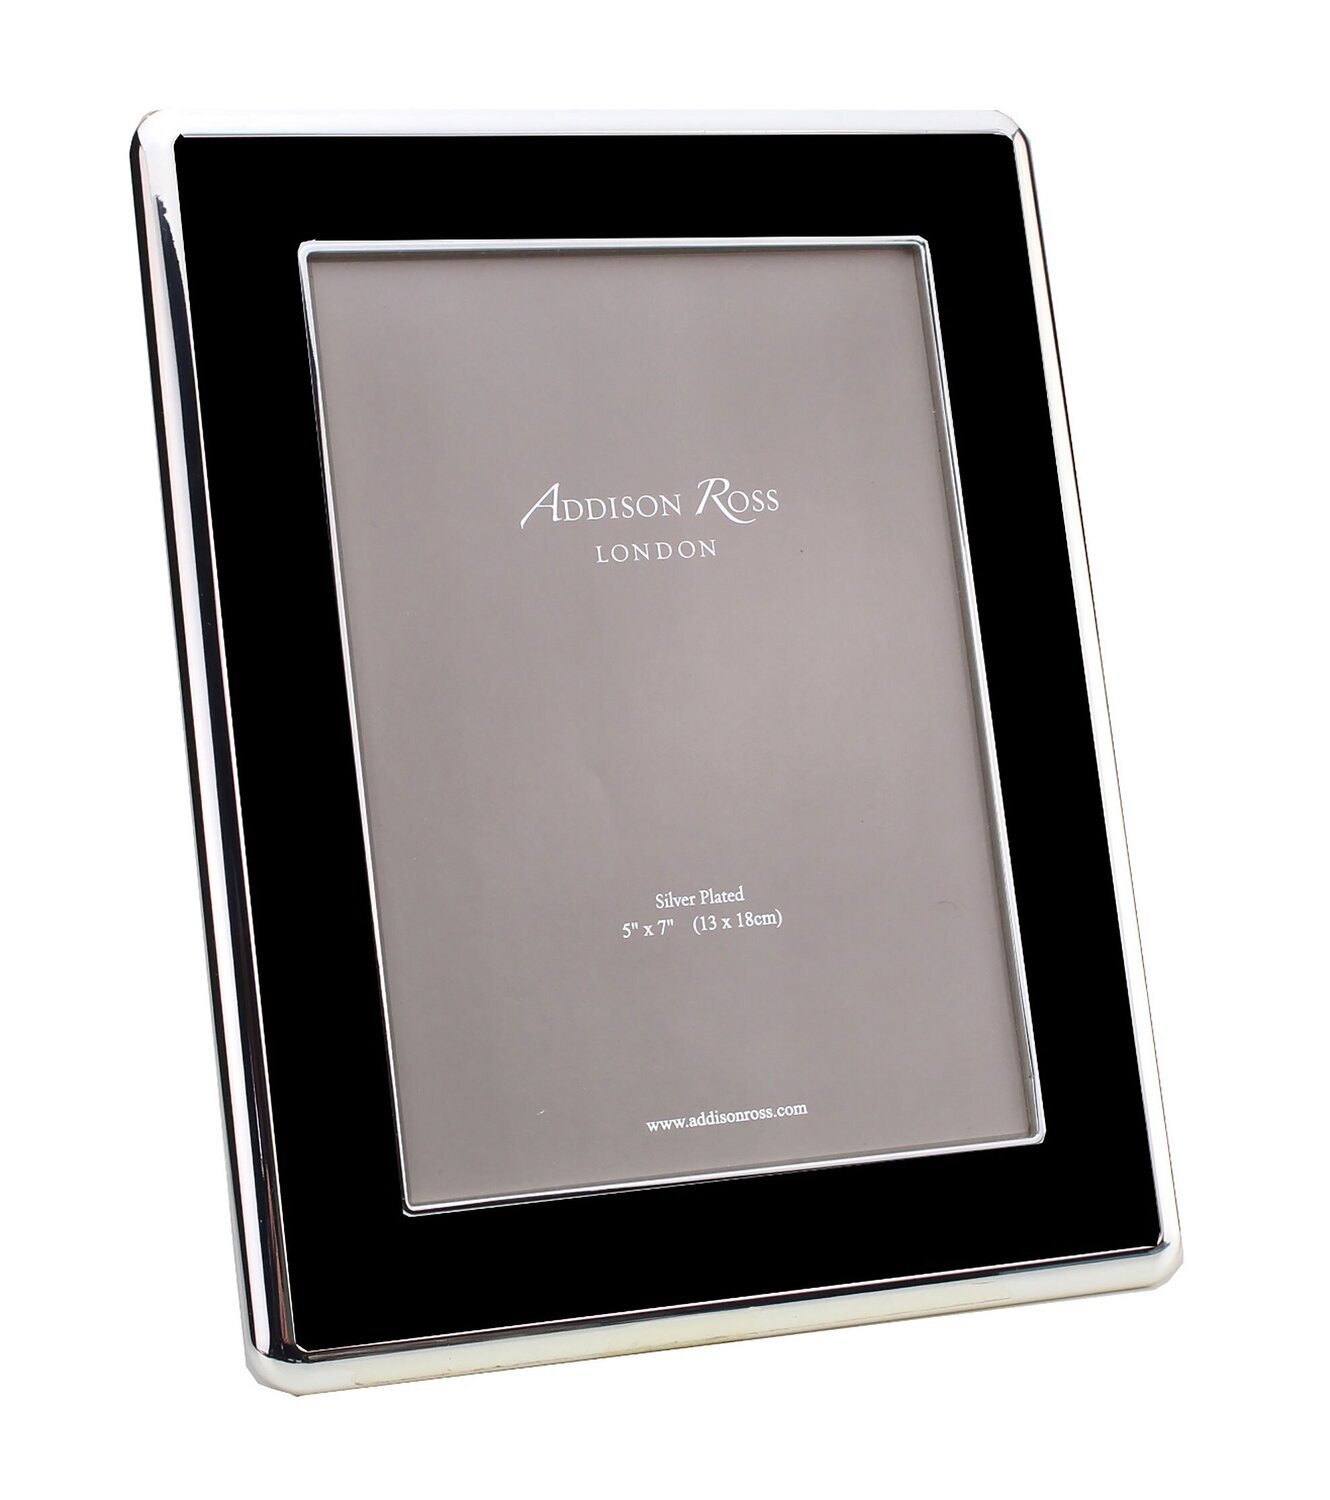 Addison Ross Wide Curved Enamel Picture Frame Black & Silver 8 x 10 Inch Silver-plated FR6110